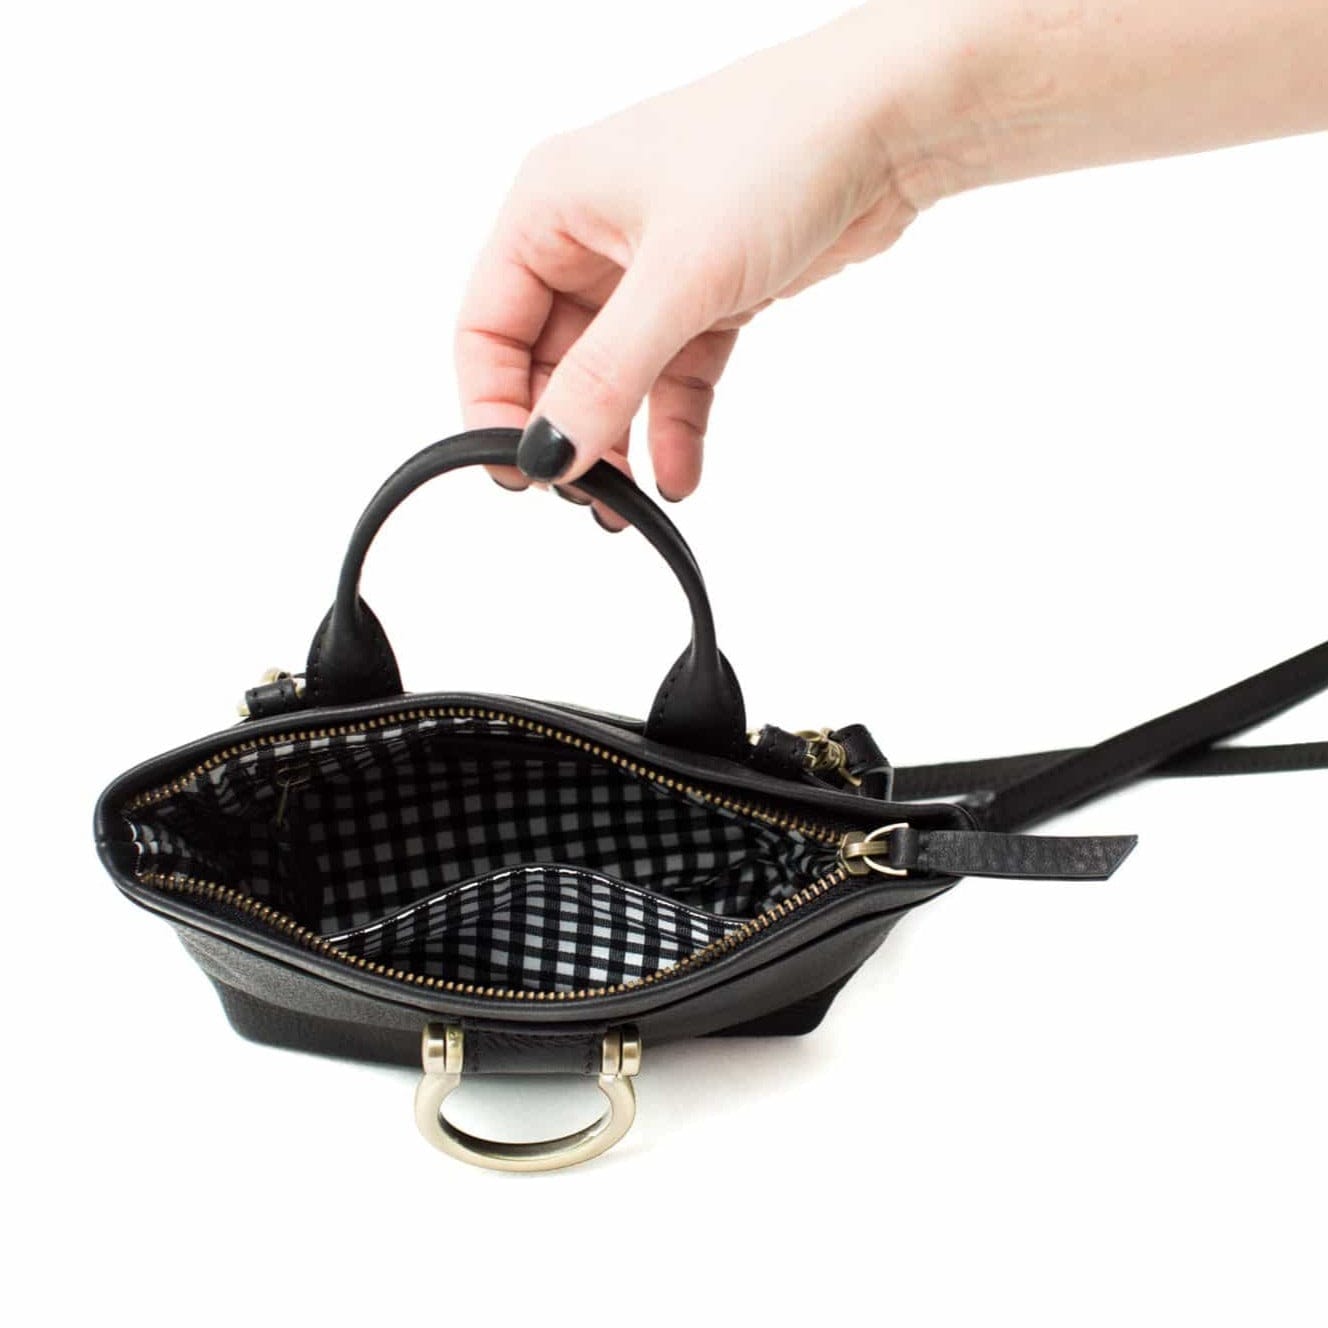 The Roger mini crossbody bag in black raw leather has two interior pockets.